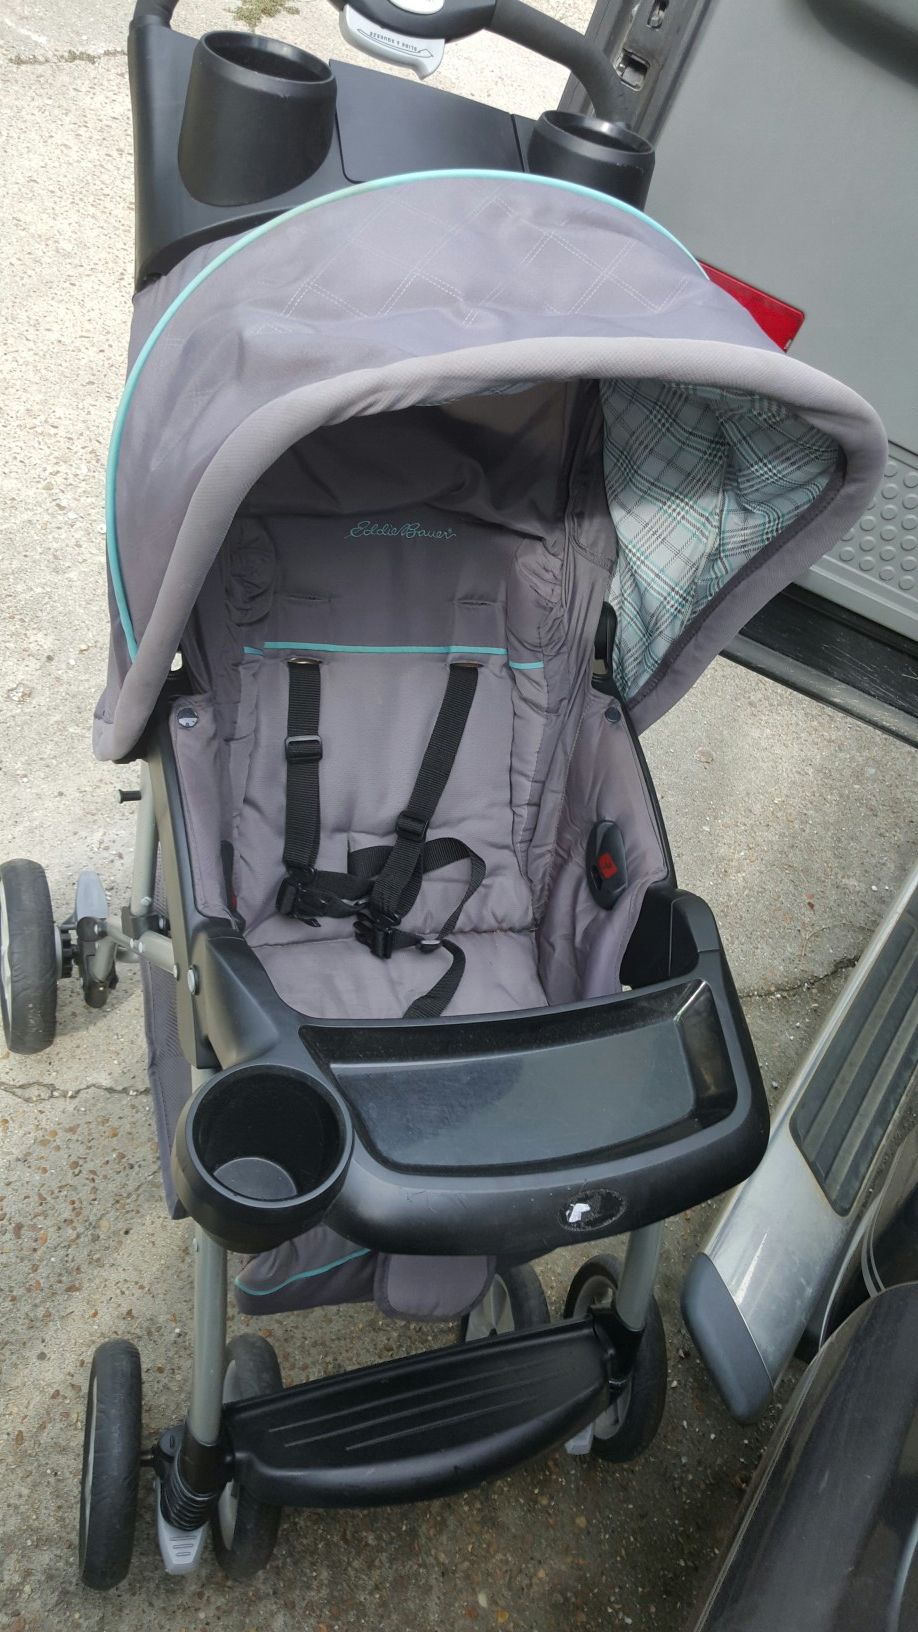 Ediebuer car seat with stroller